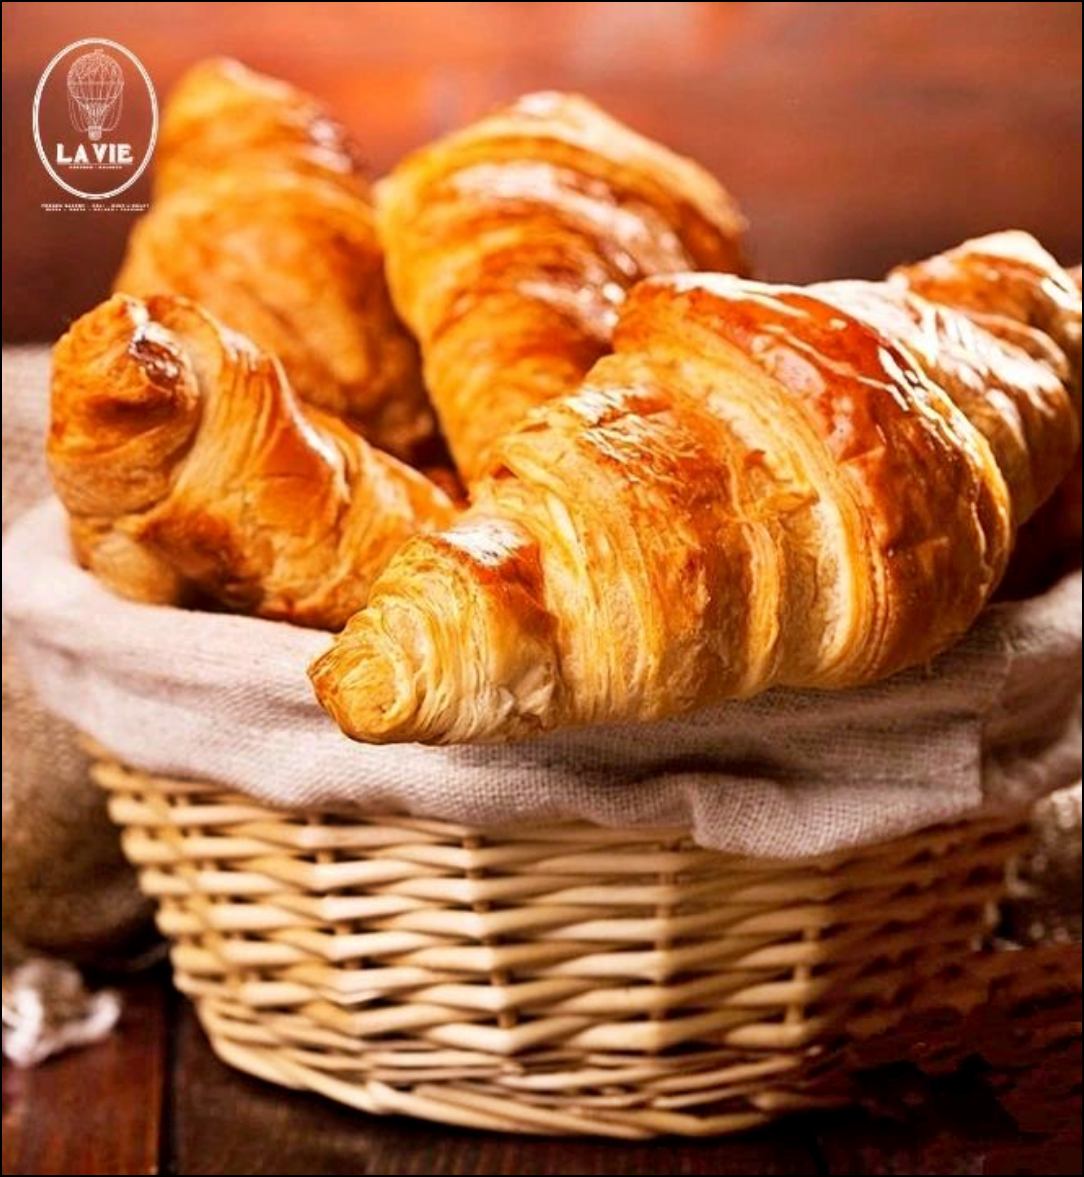 FRENCH PASTRIES